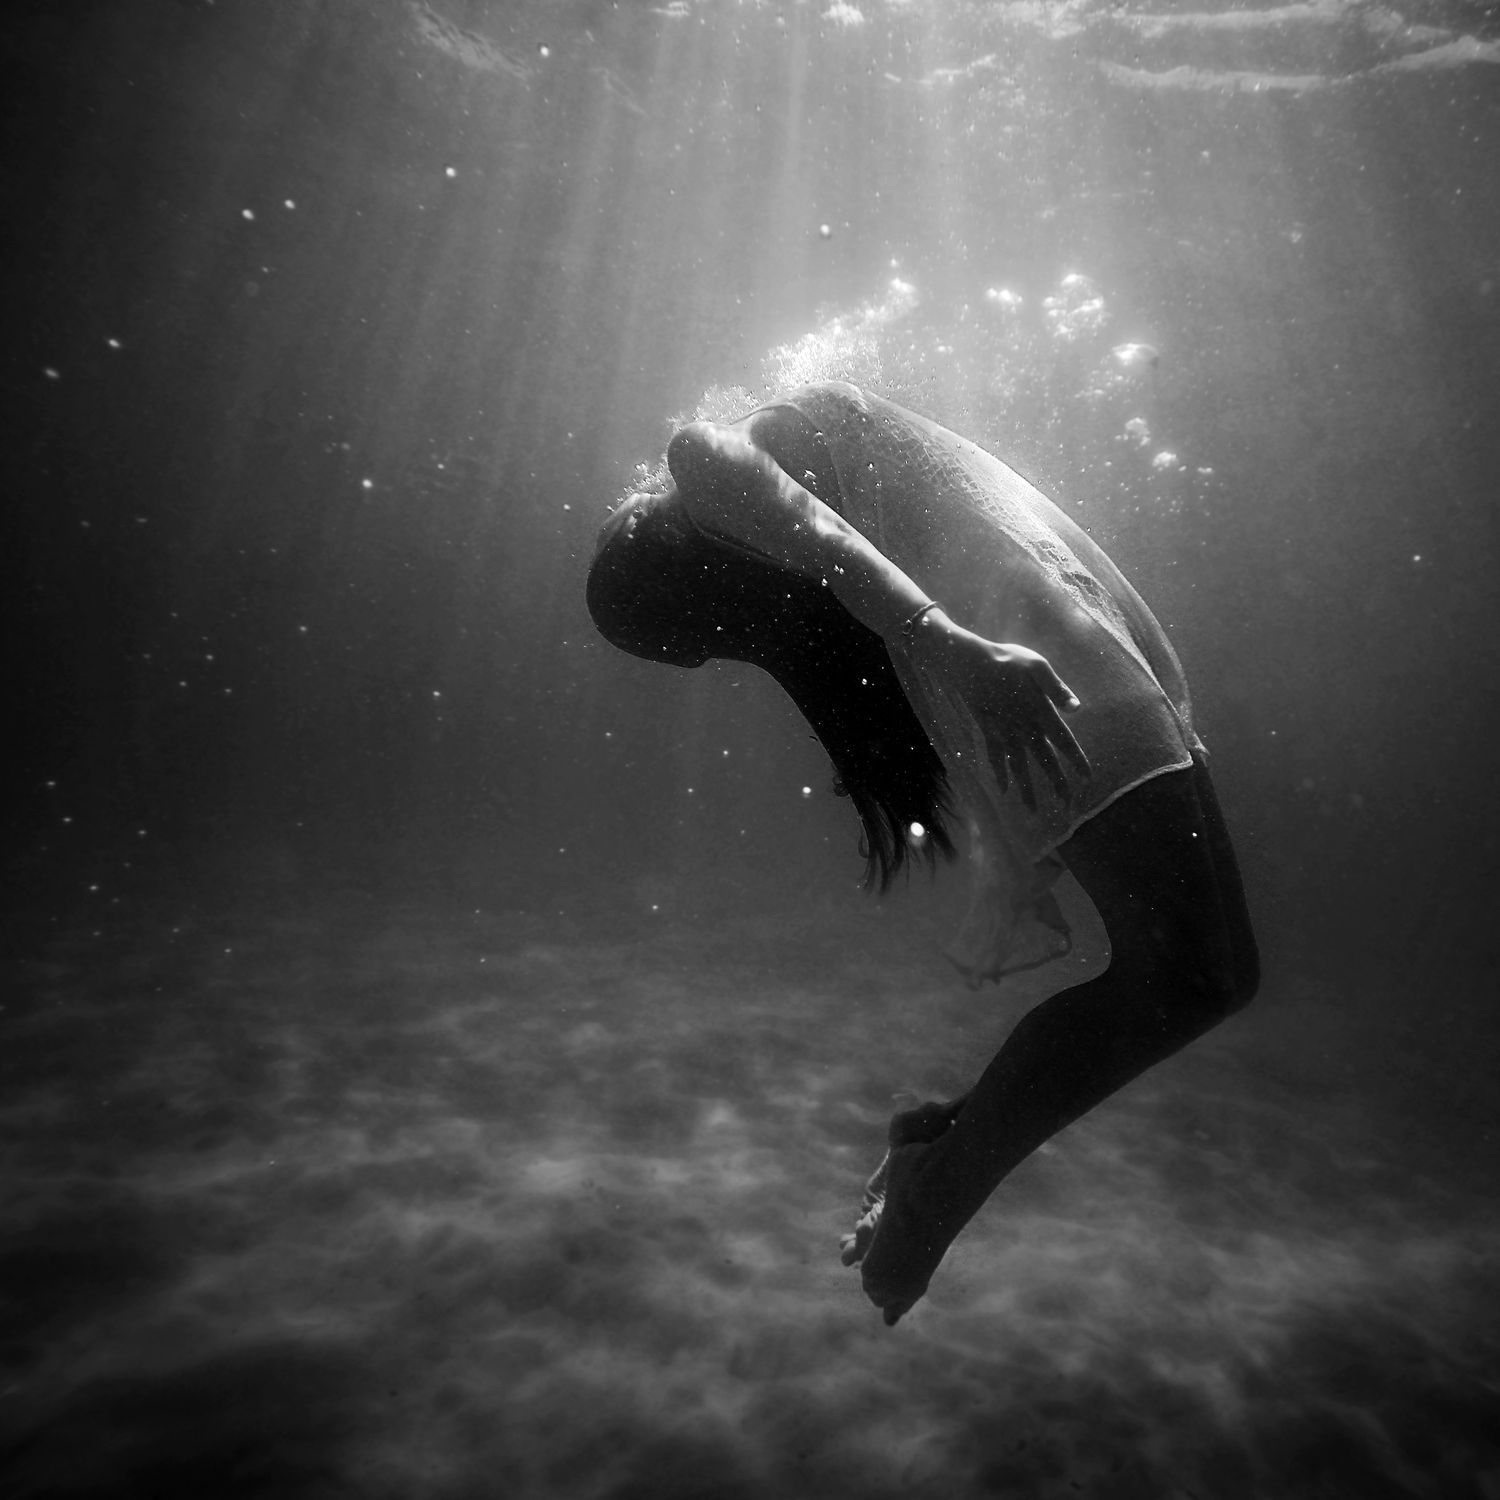 drowning dream meaning, dream about drowning, drowning dream interpretation, seeing in a dream drowning